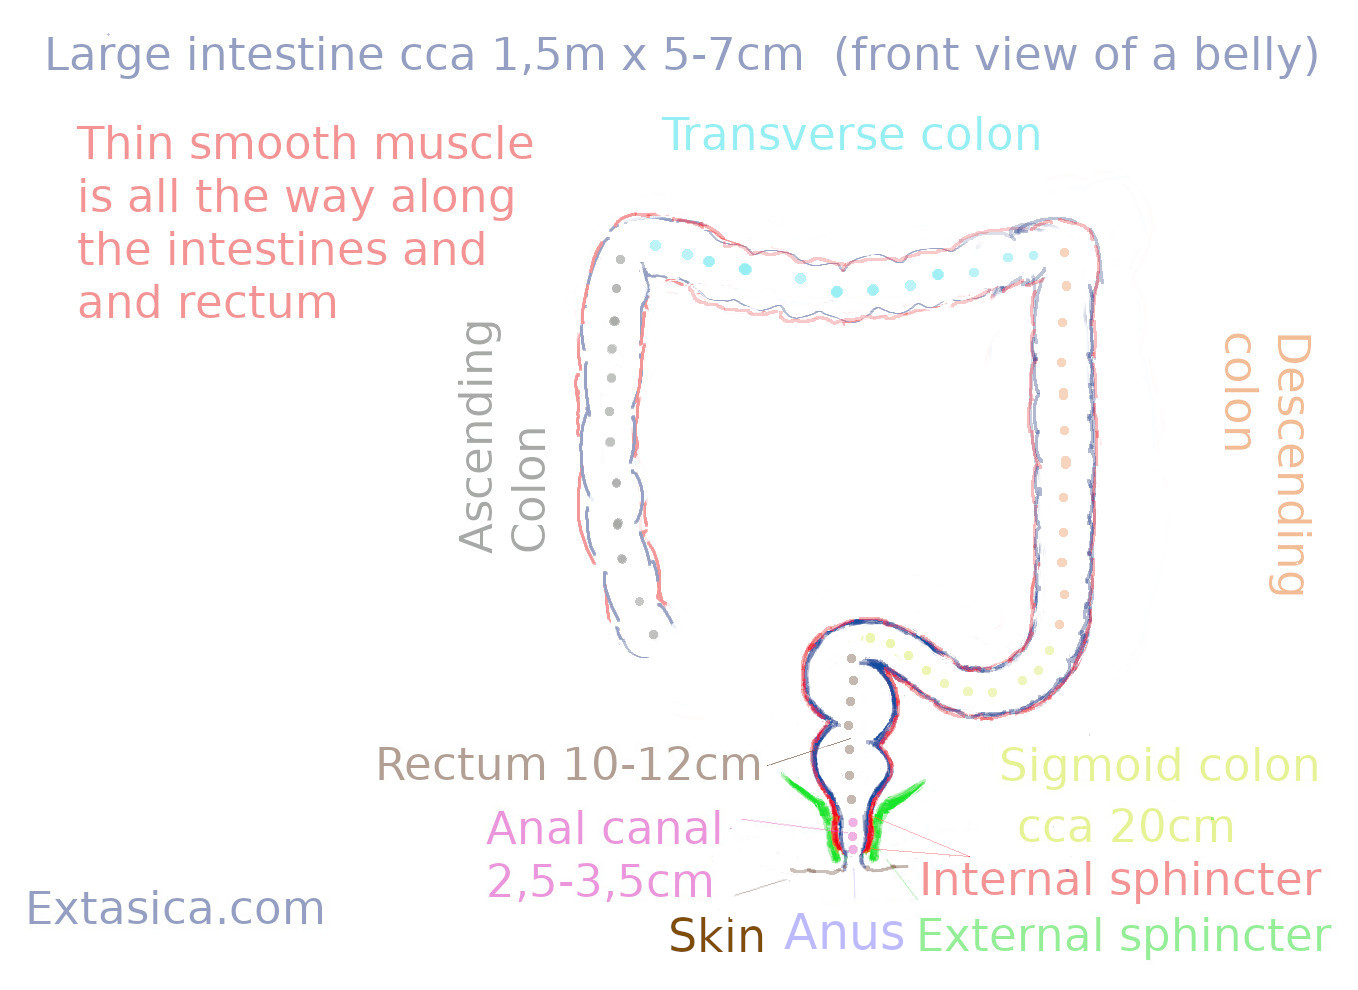 The Anatomy of Extreme Anal Insertion